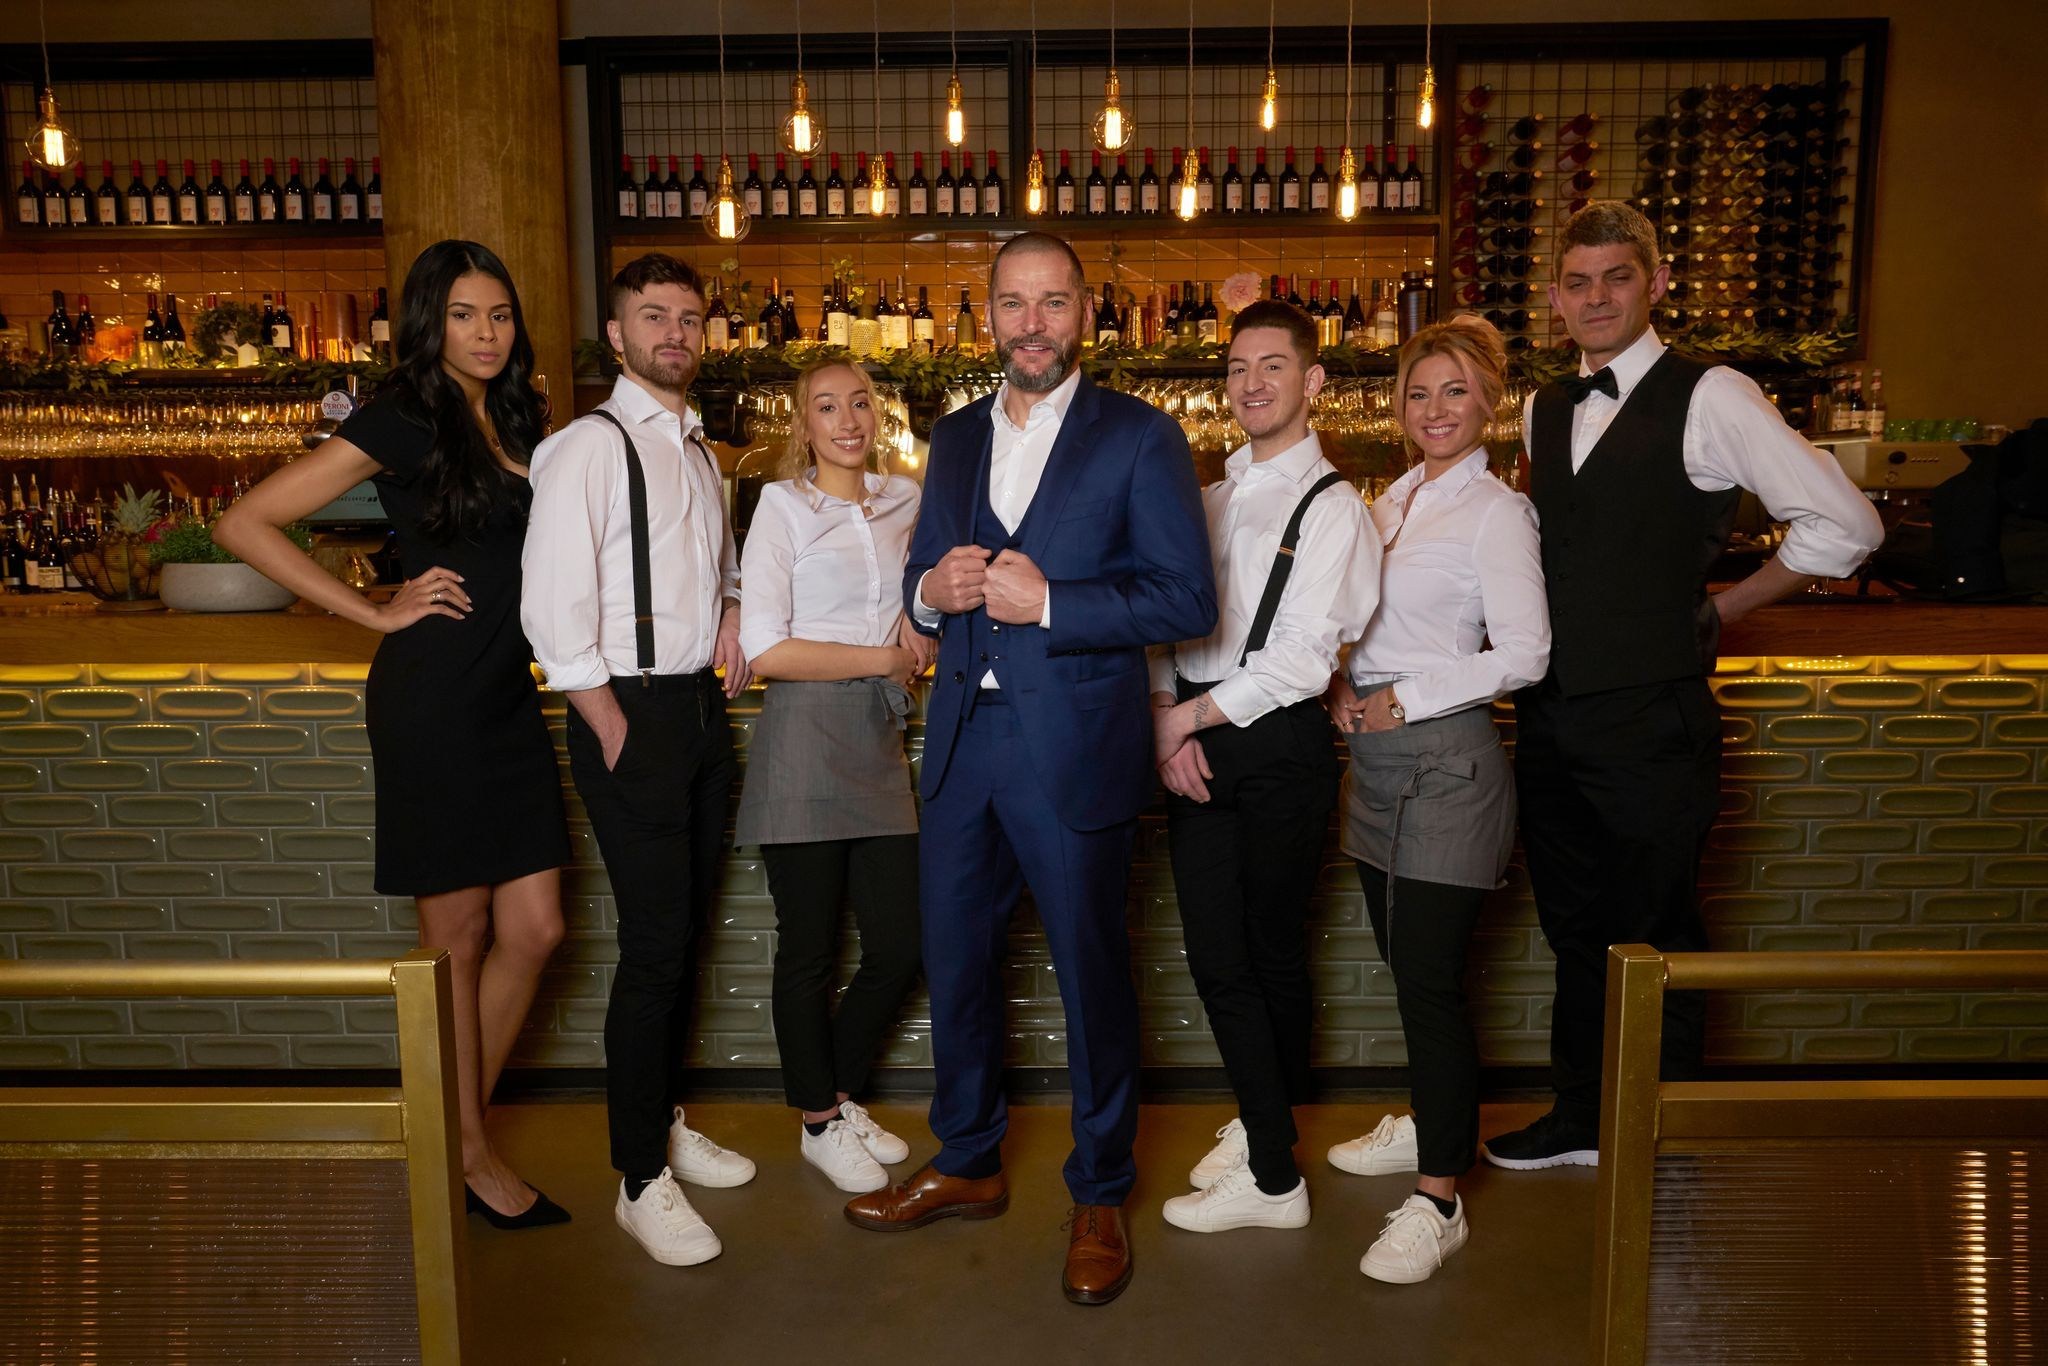 First Dates Manchester staff reveal strict rules allowing filming in lockdown